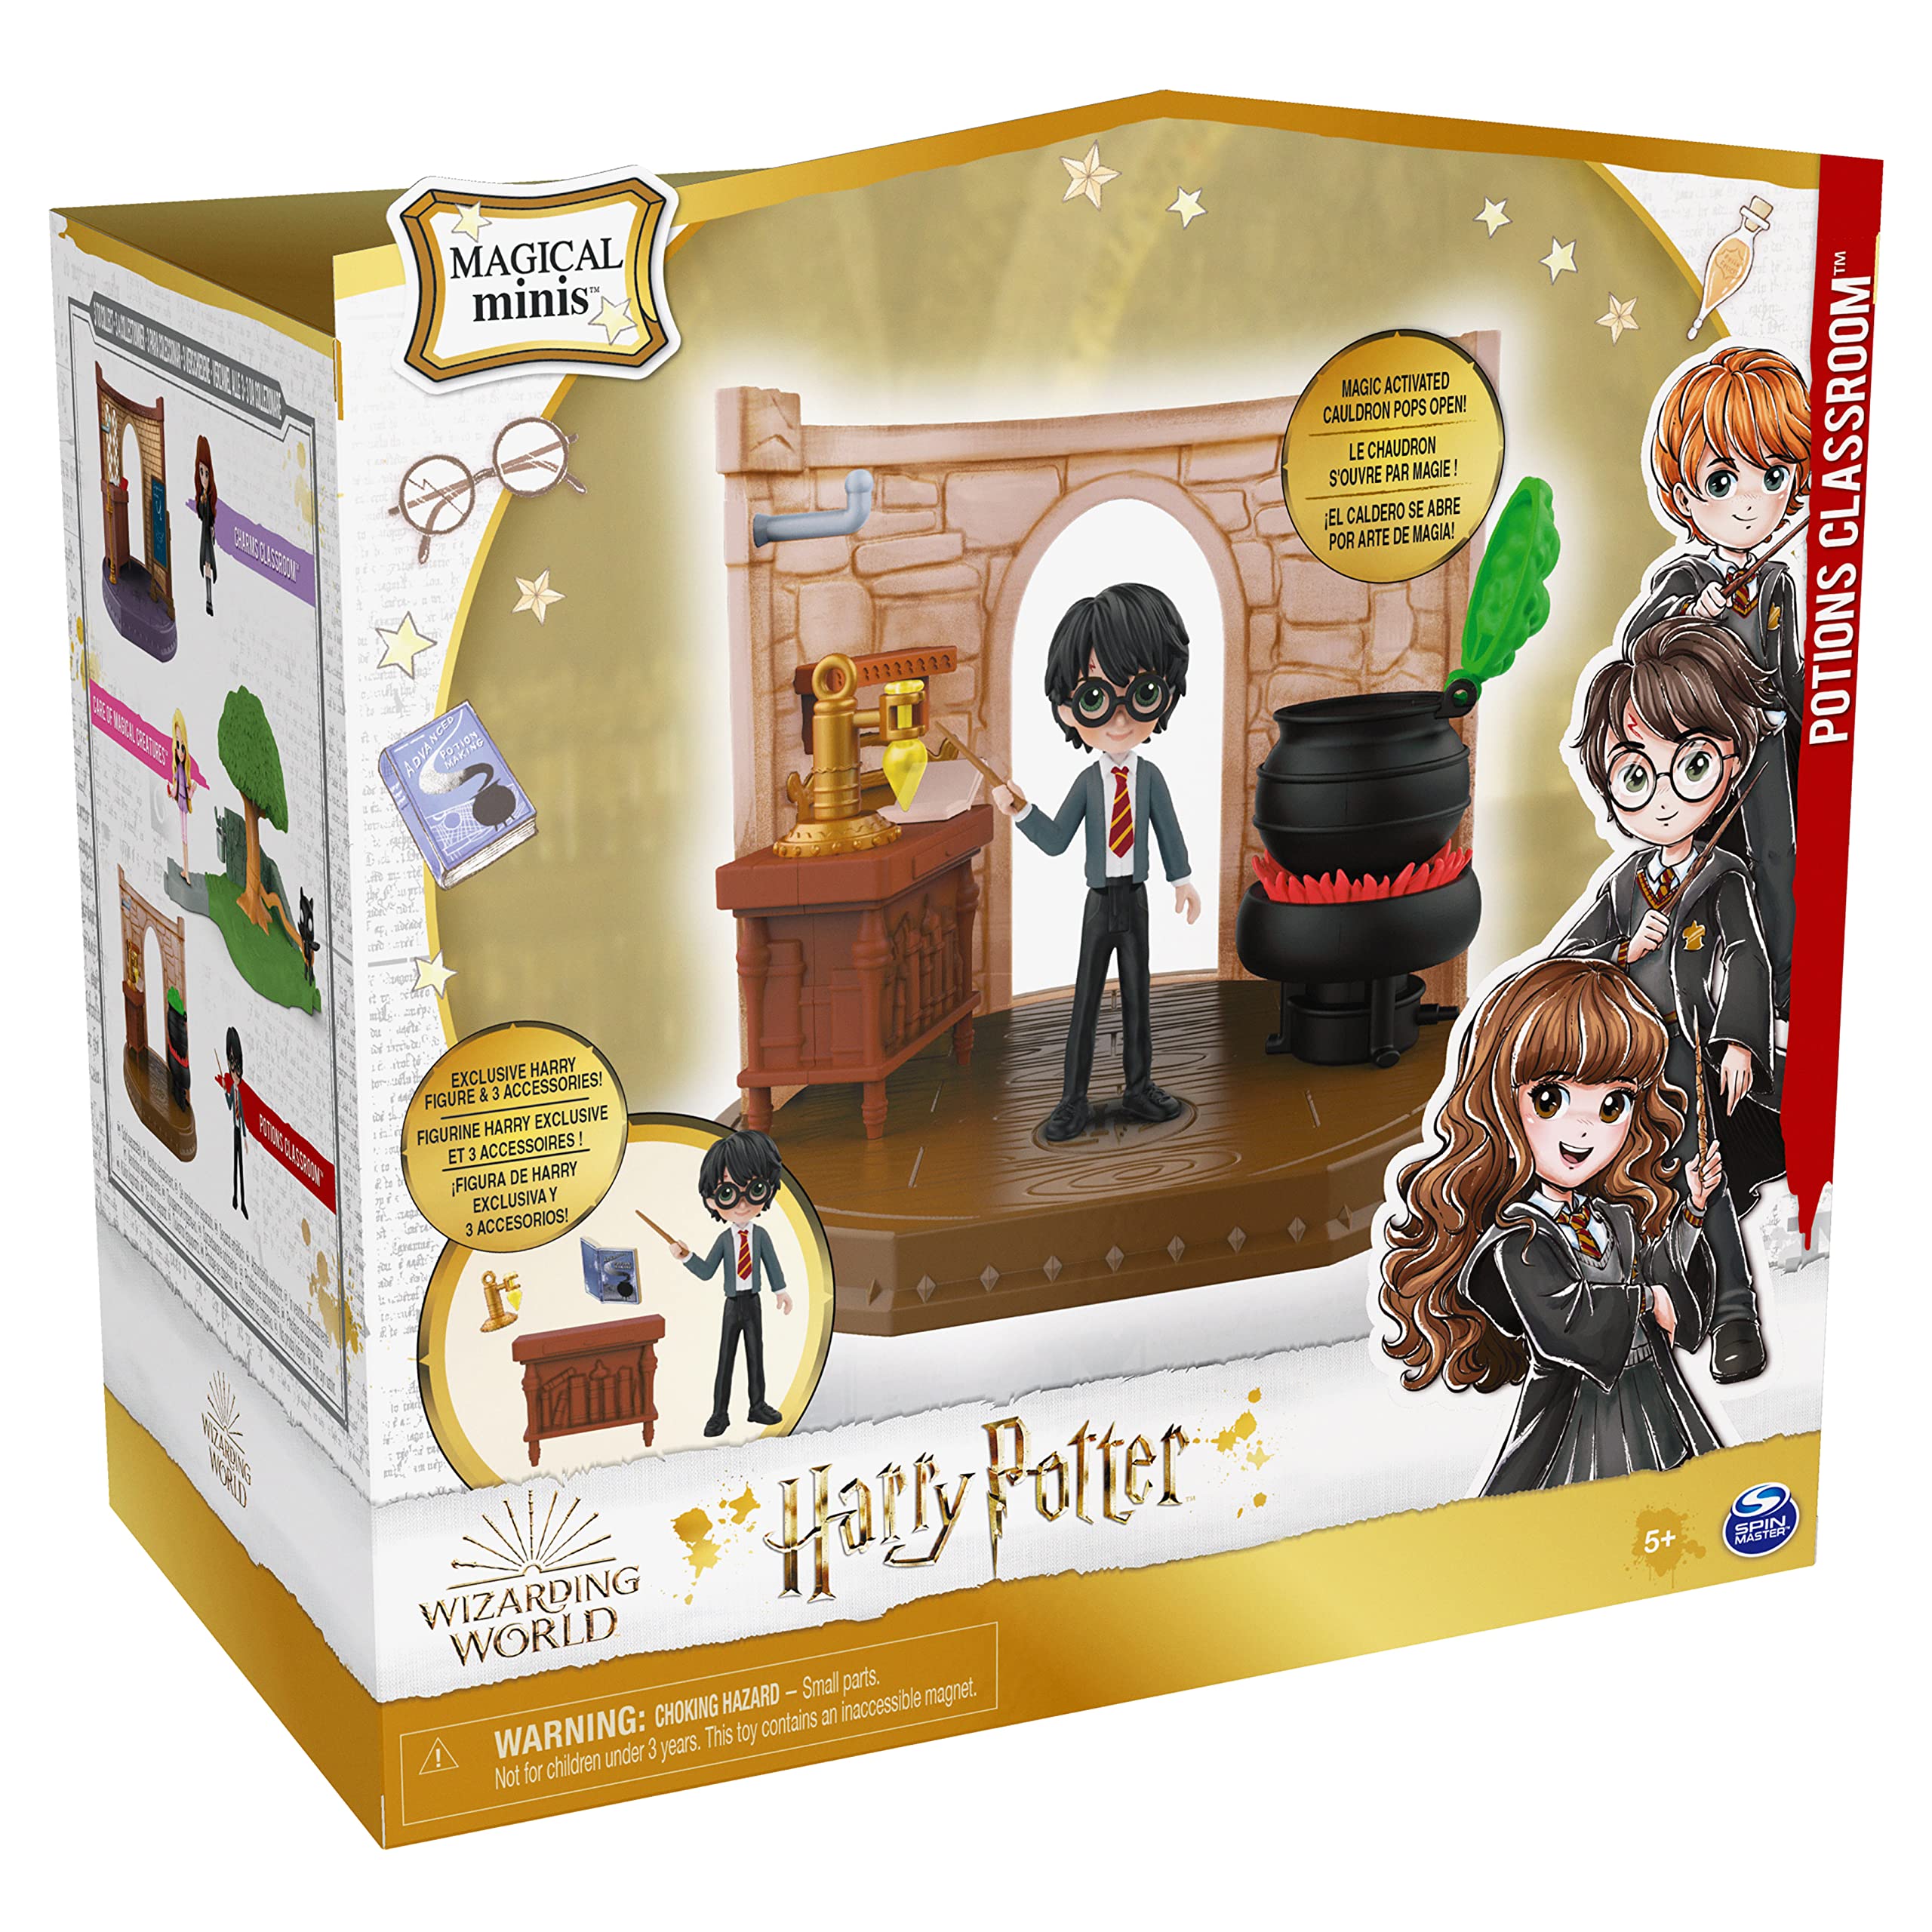 Wizarding World Harry Potter, Magical Minis Potions Classroom with Exclusive Harry Potter Figure and Accessories, Kids Toys for Ages 5 and up